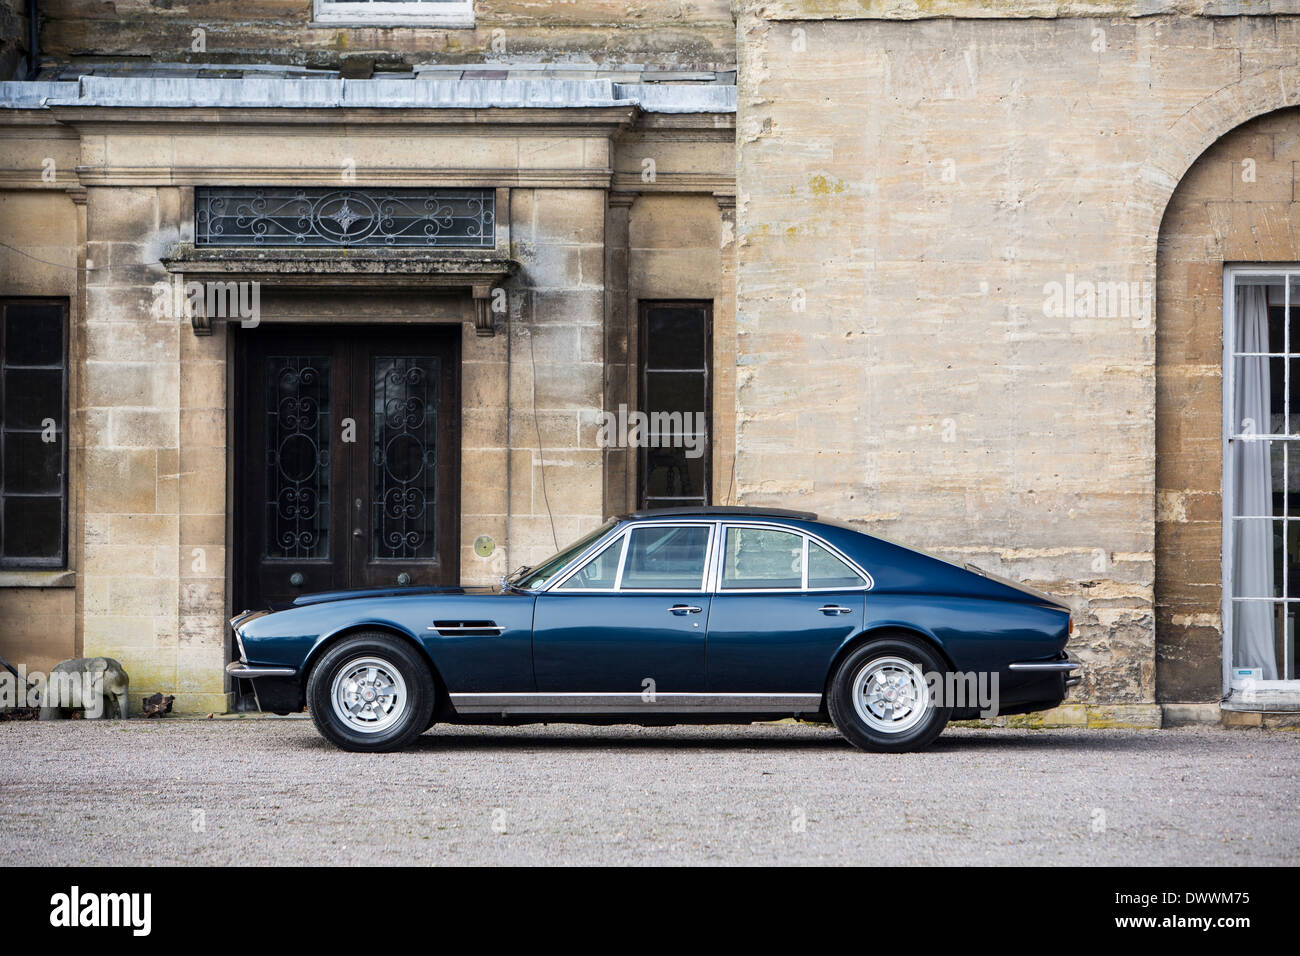 Project Car: A 1969 Aston Martin DBS – 40 Years In Storage